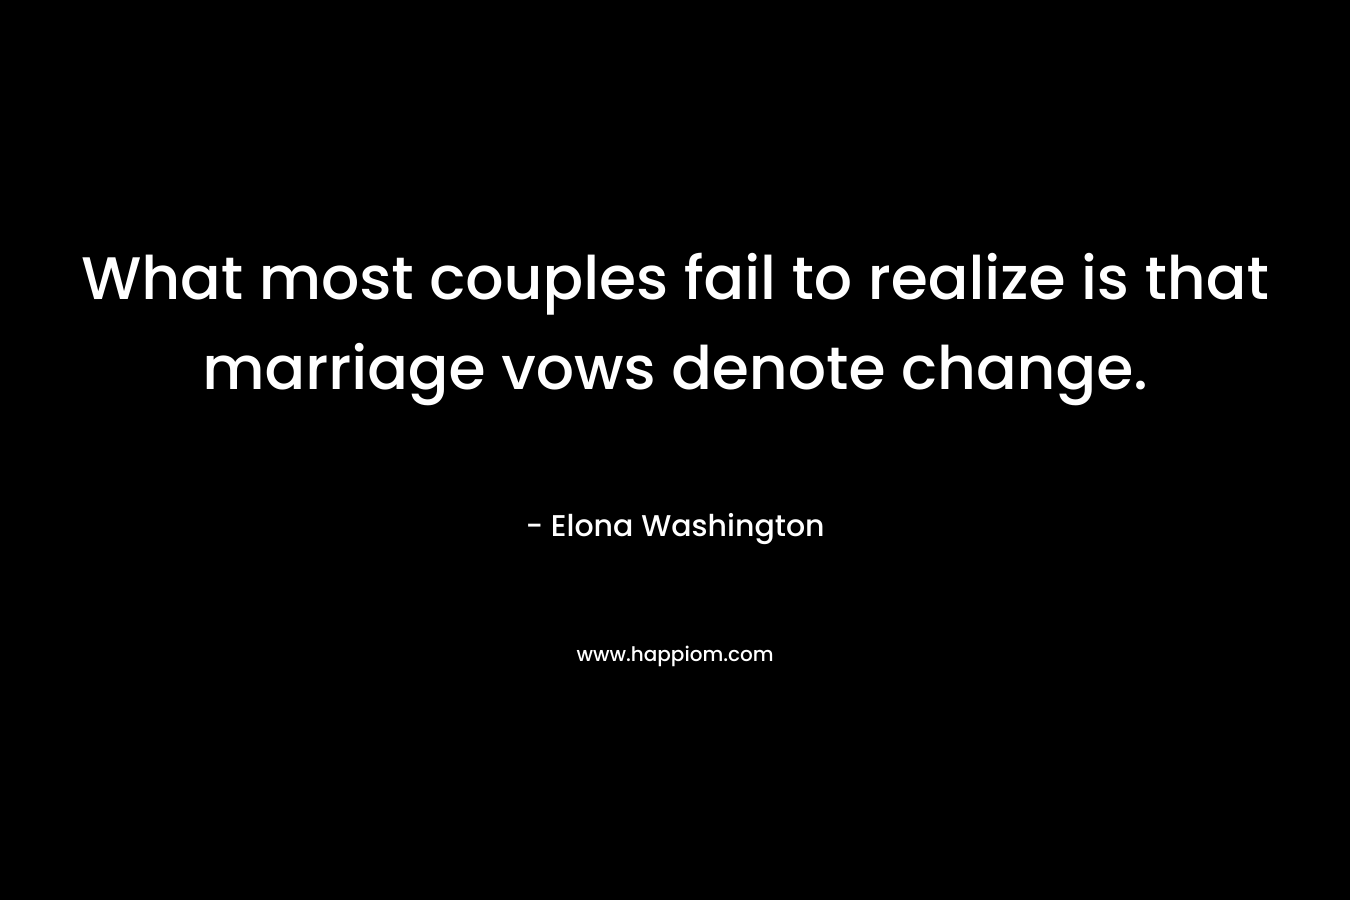 What most couples fail to realize is that marriage vows denote change. – Elona Washington